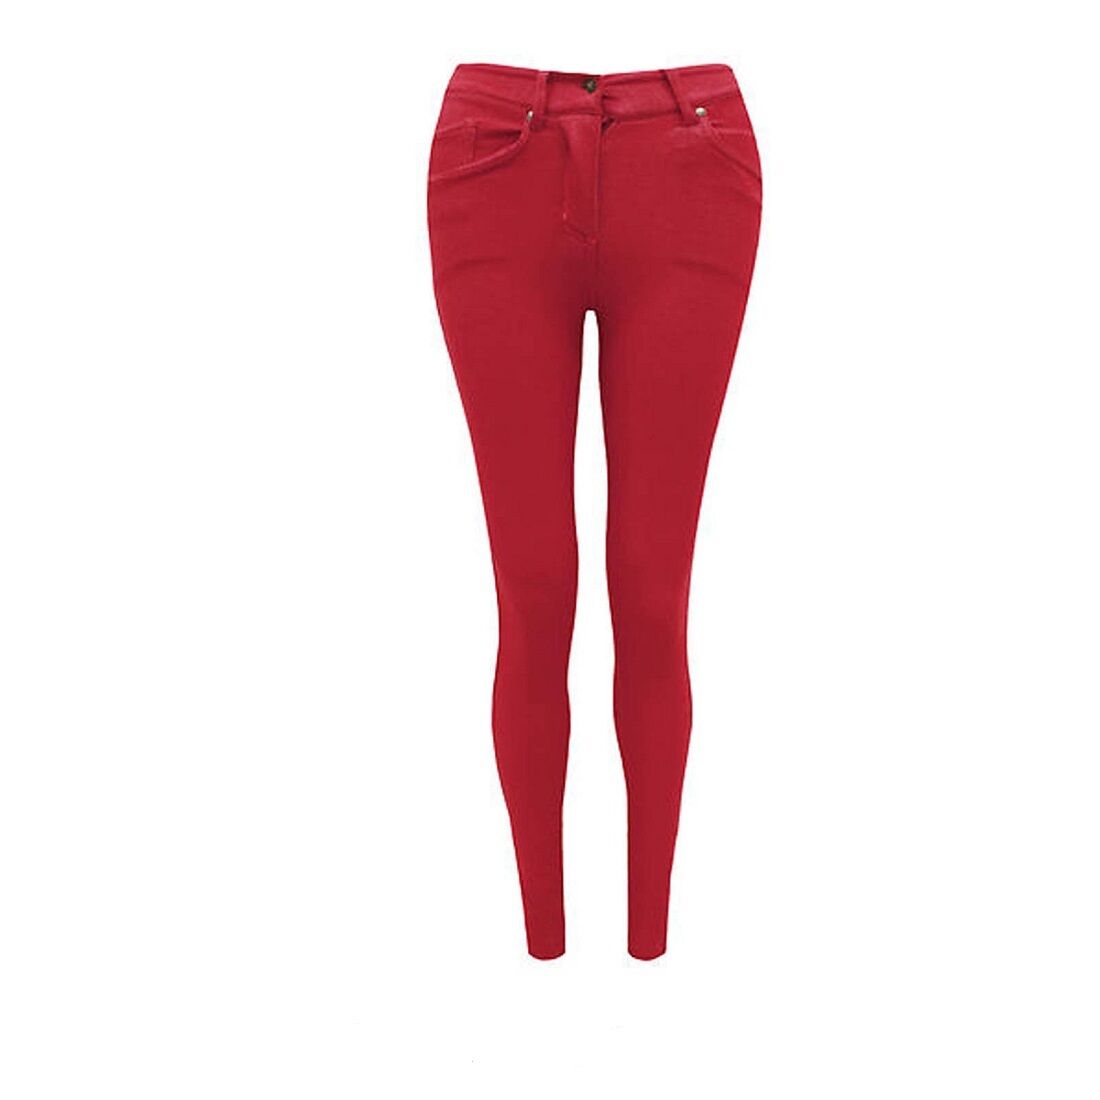 Ladies Red Skinny Jeggings. Available In Sizes 8-22.